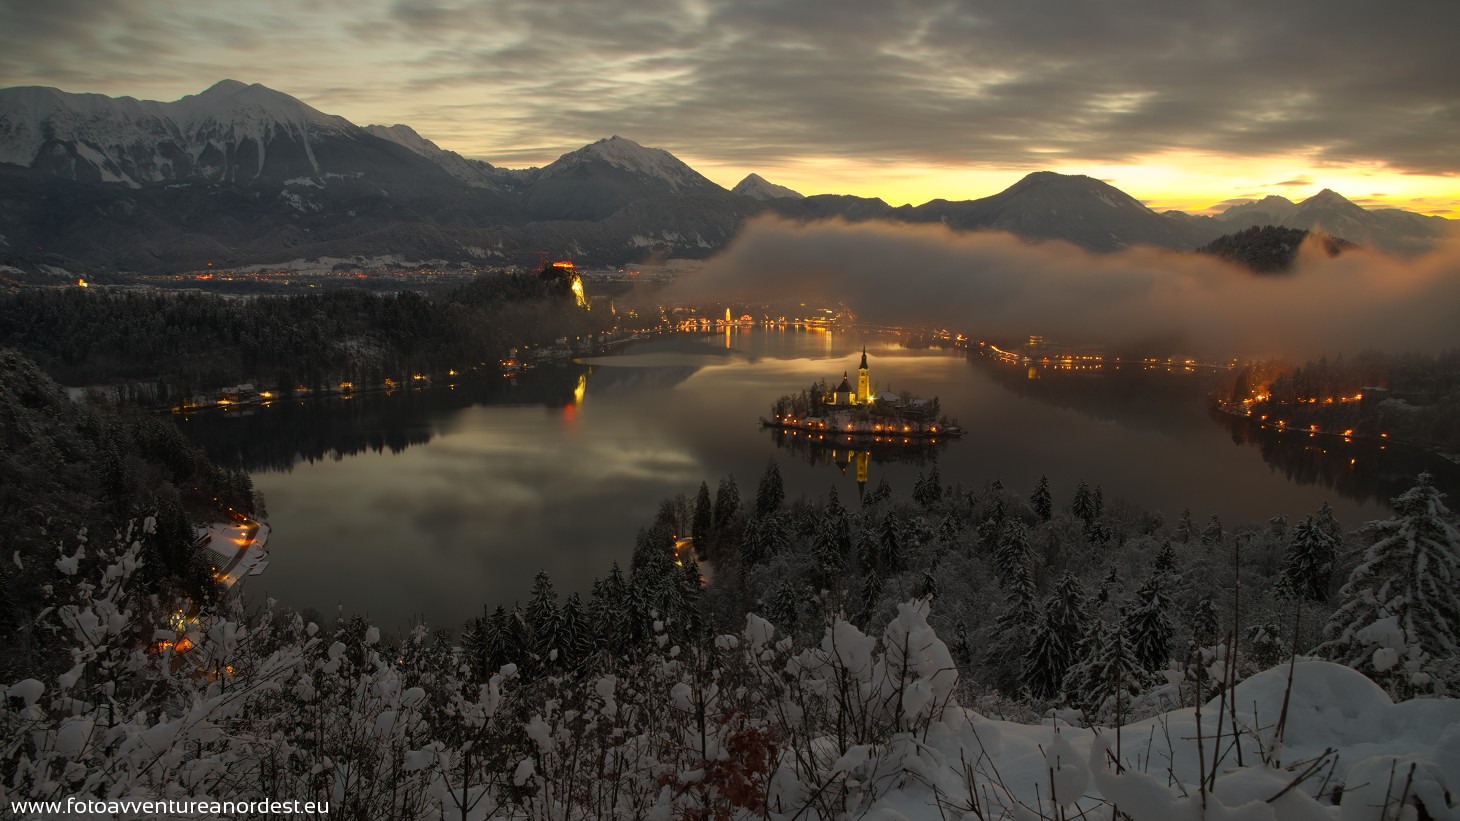 Just before dawn on the Julian Alps (Lake Bled)...